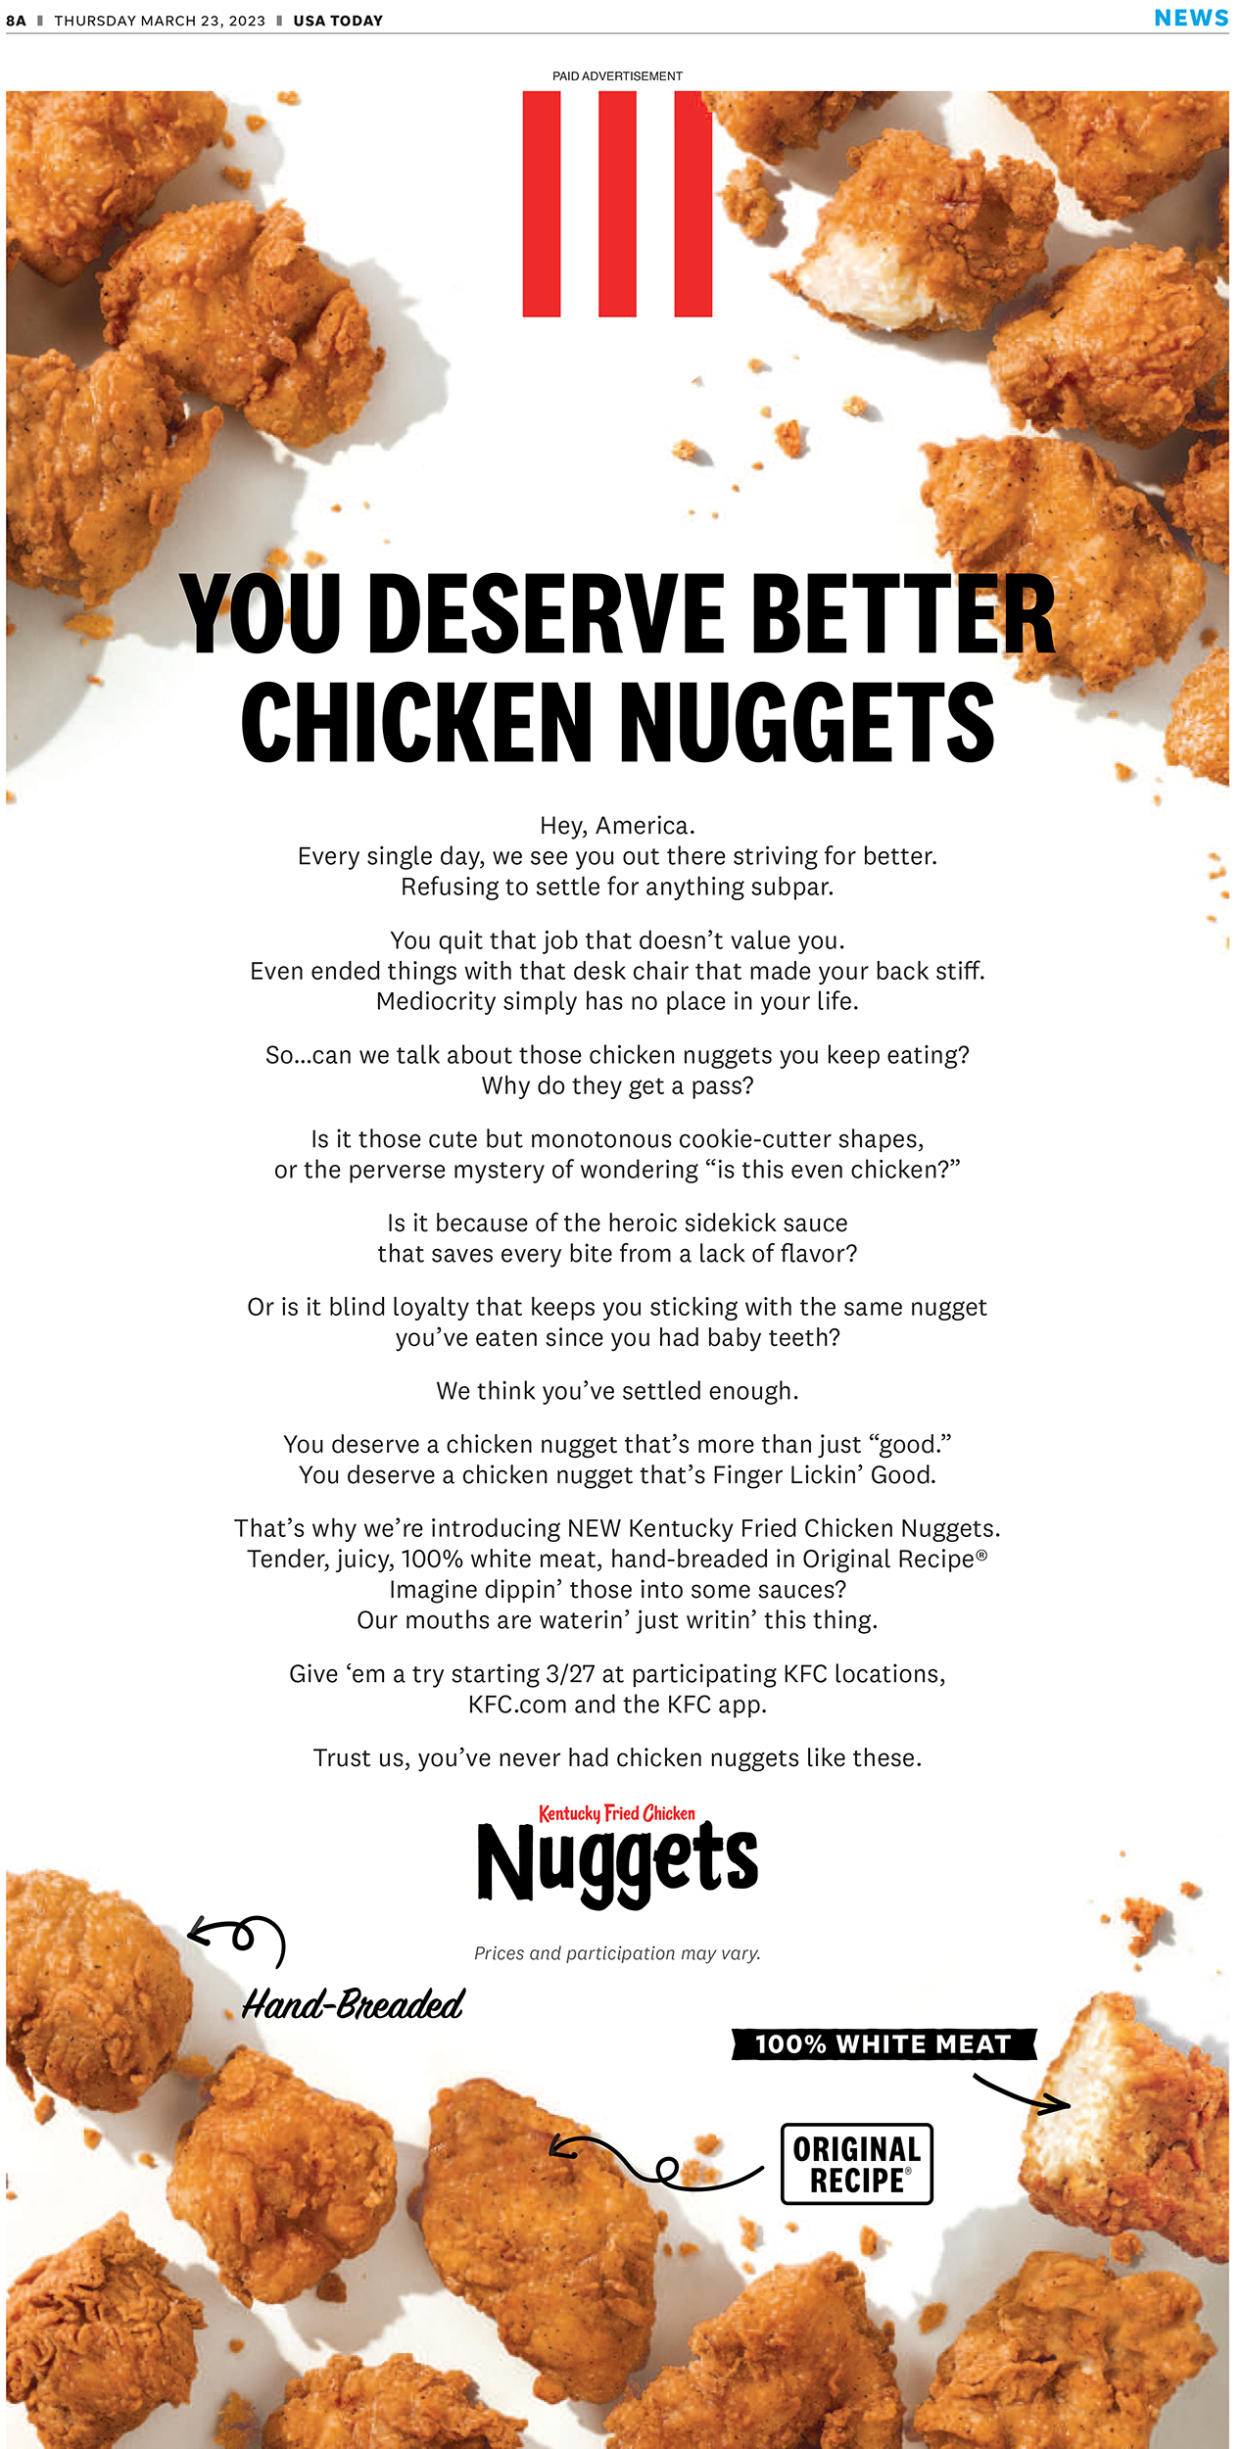  KFC's letter, titled “You Deserve Better Chicken Nuggets,” which appeared in USA Today on March 23. (KFC)